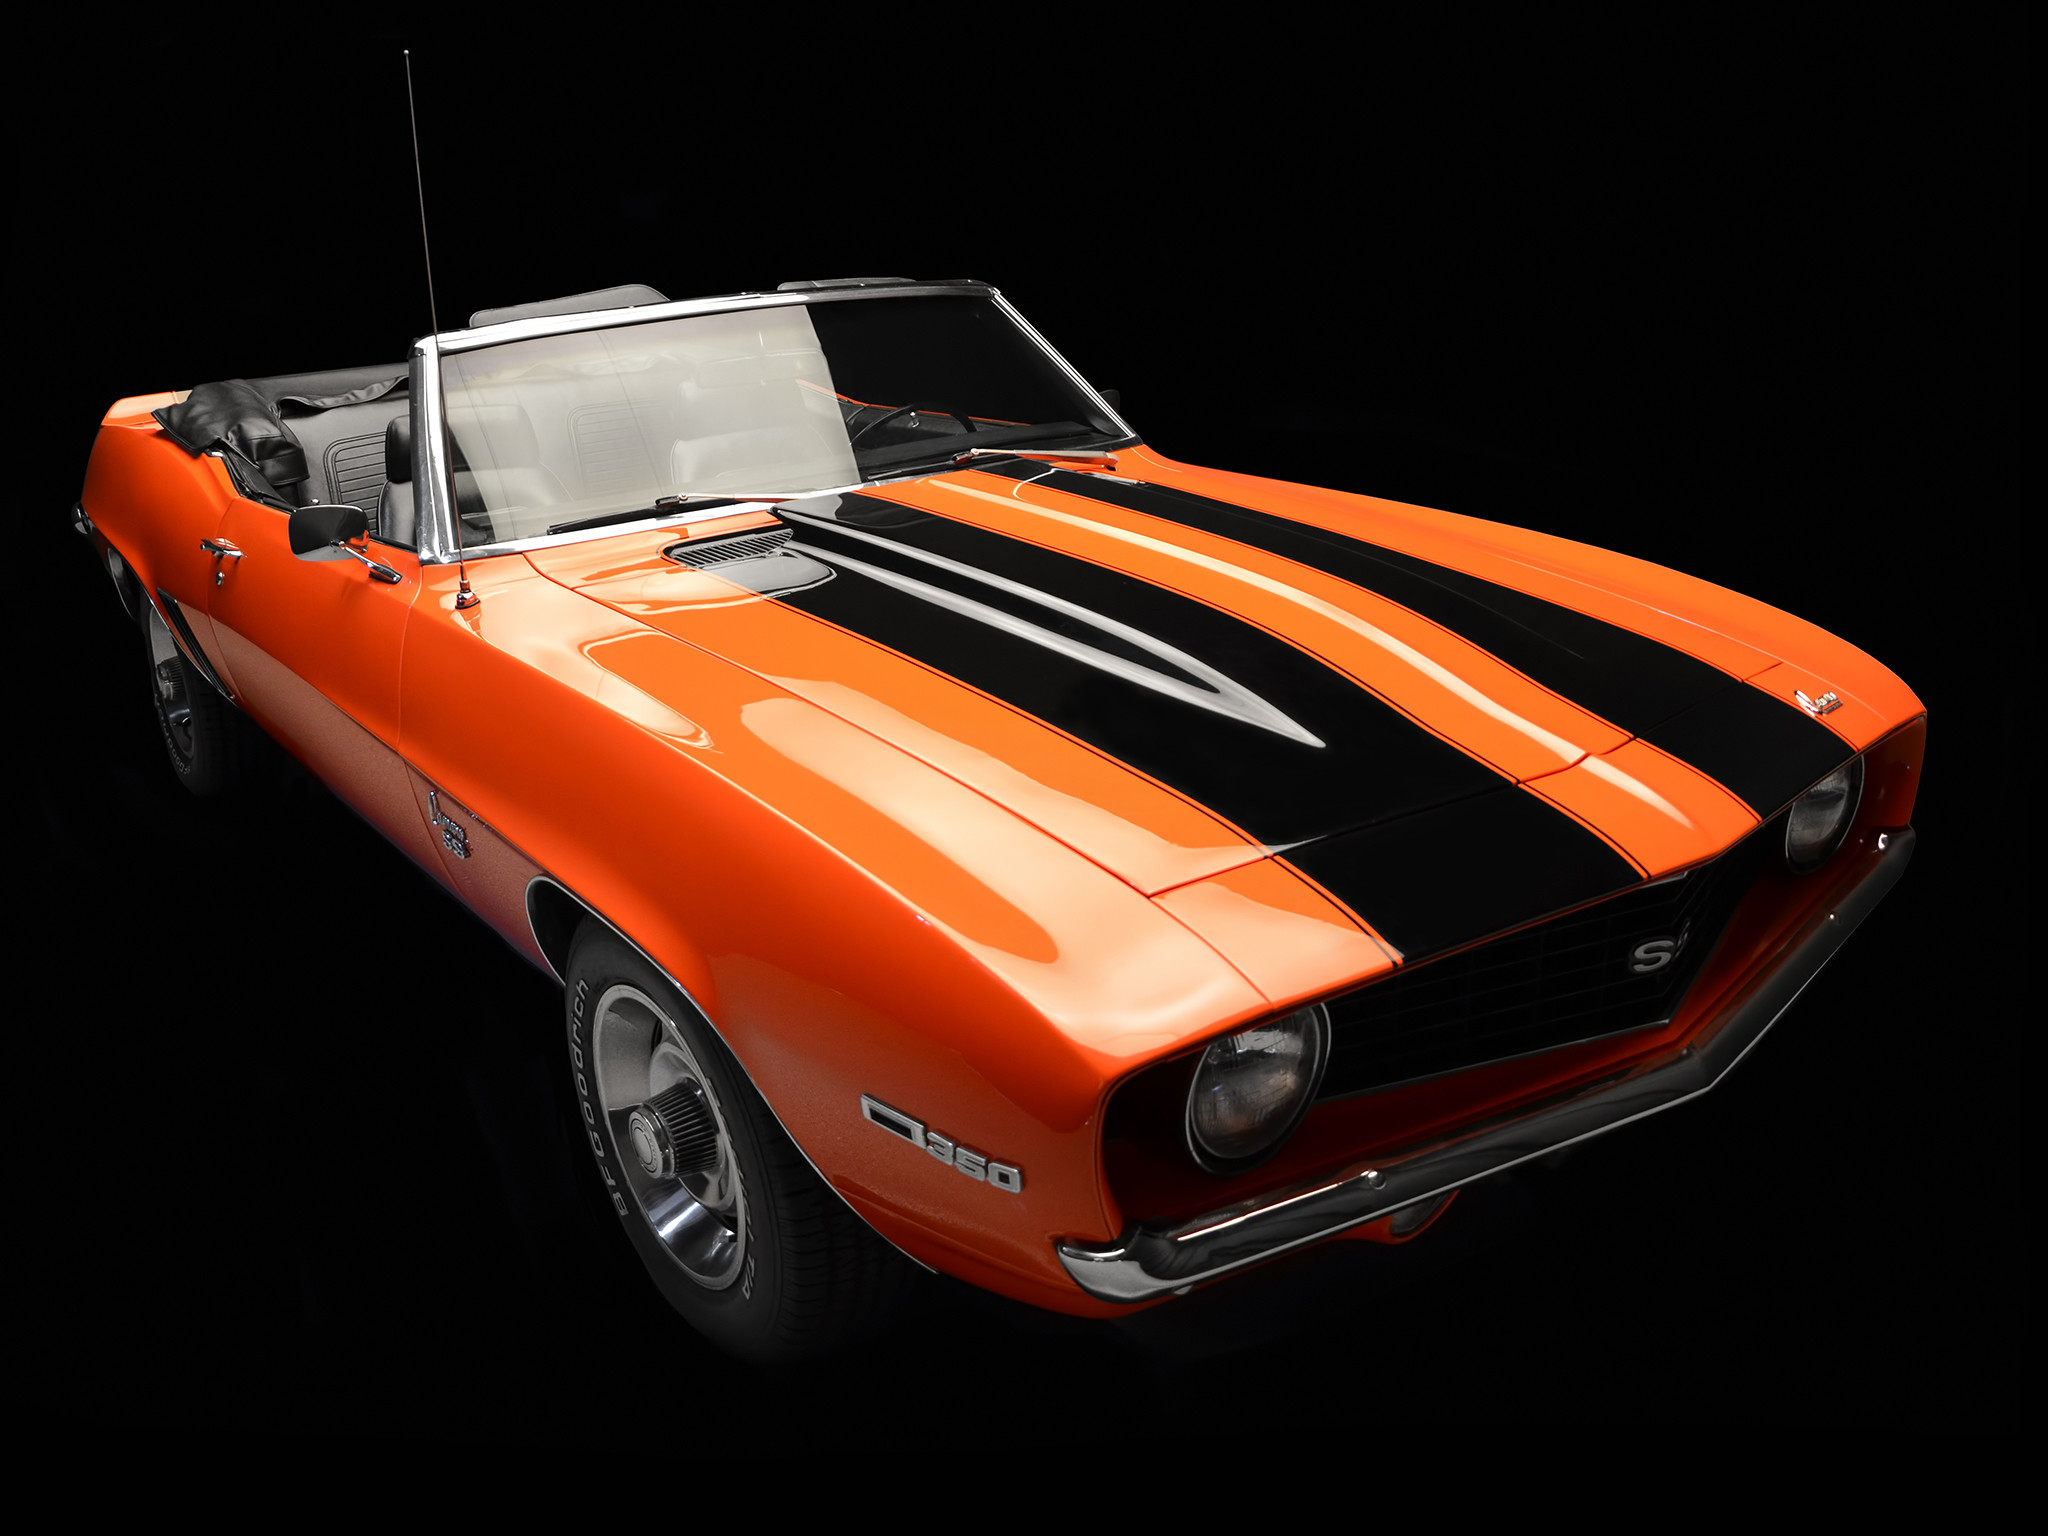 2048x1536 1969 chevrolet camaro ss 350 convertible muscle classic s s wallpaper